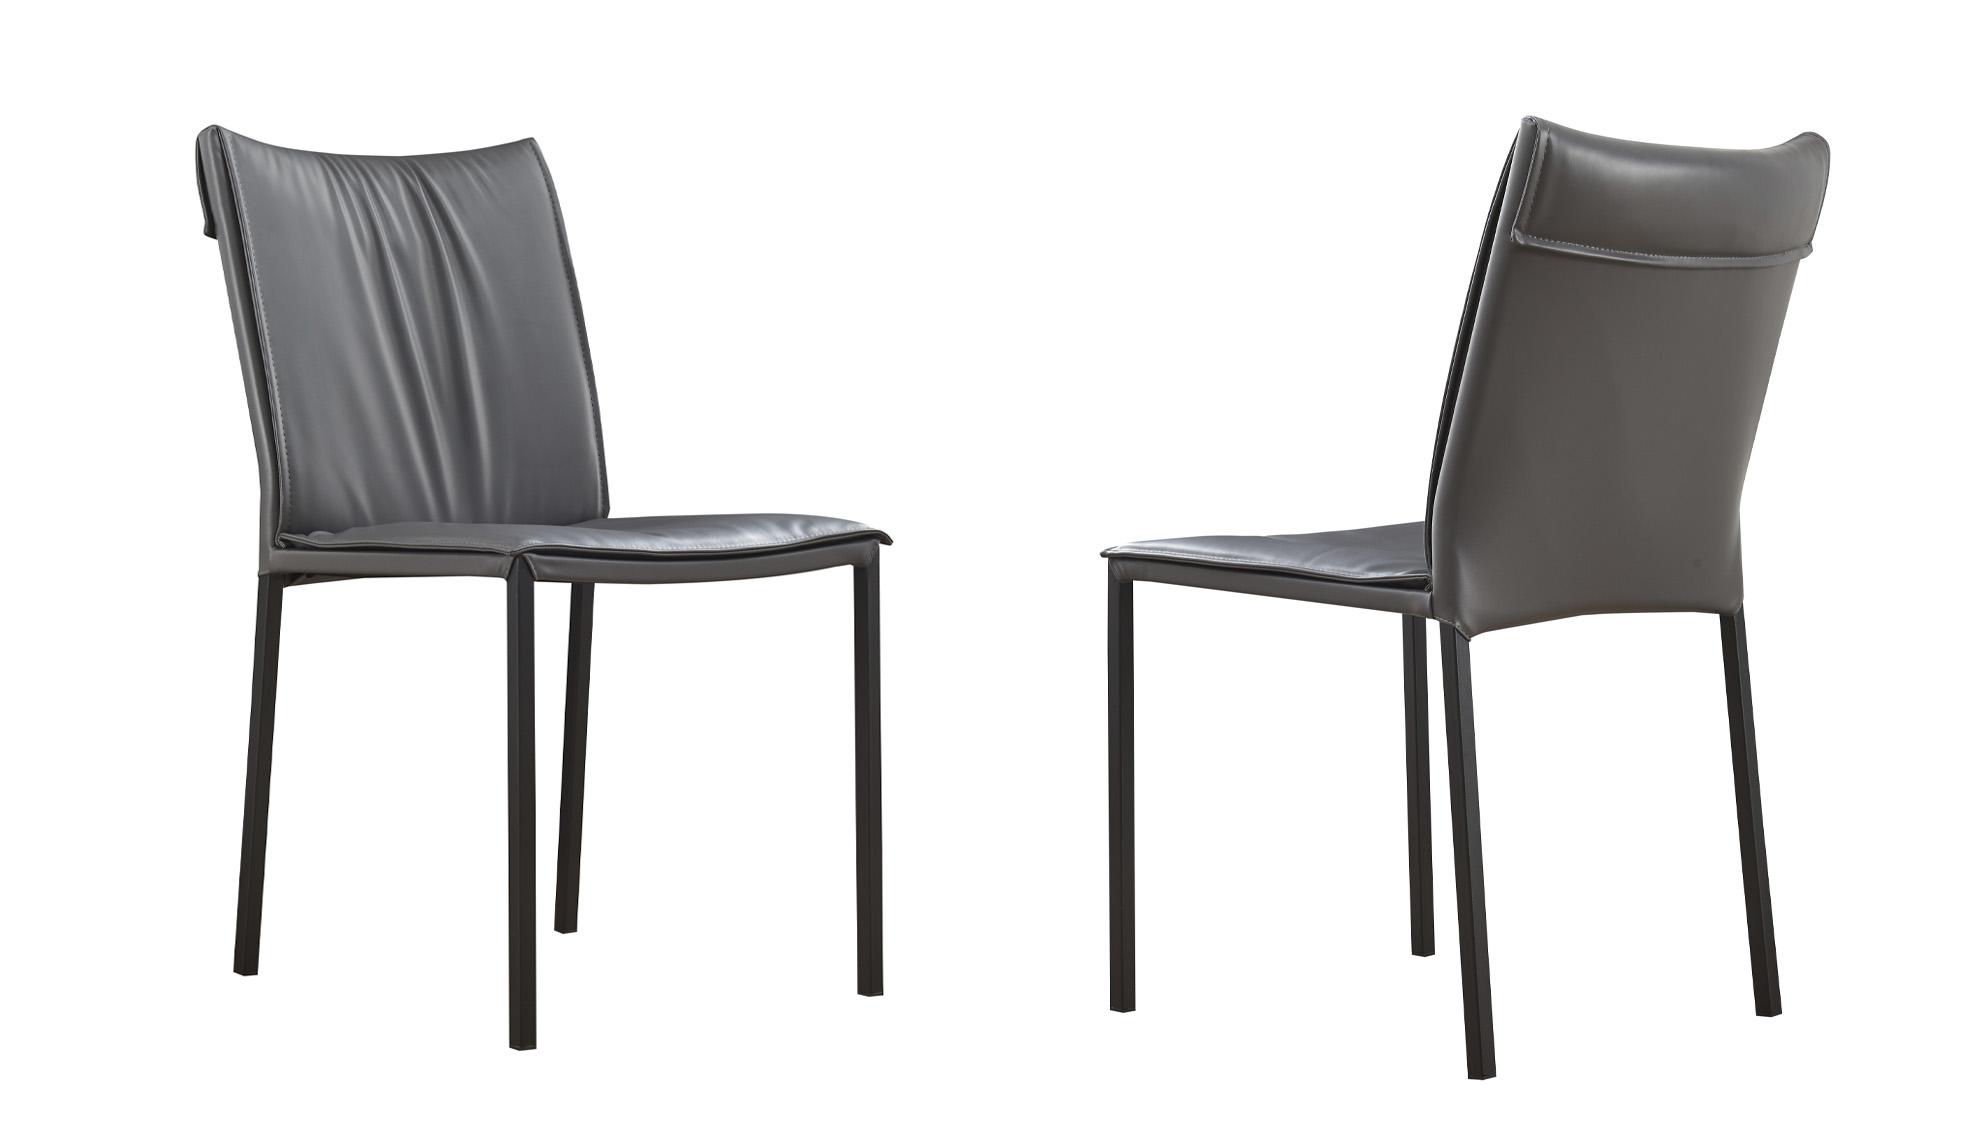 Contemporary, Modern Dining Chair Set Las Vegas SKU 18876-Set-2 in Gray Eco Leather